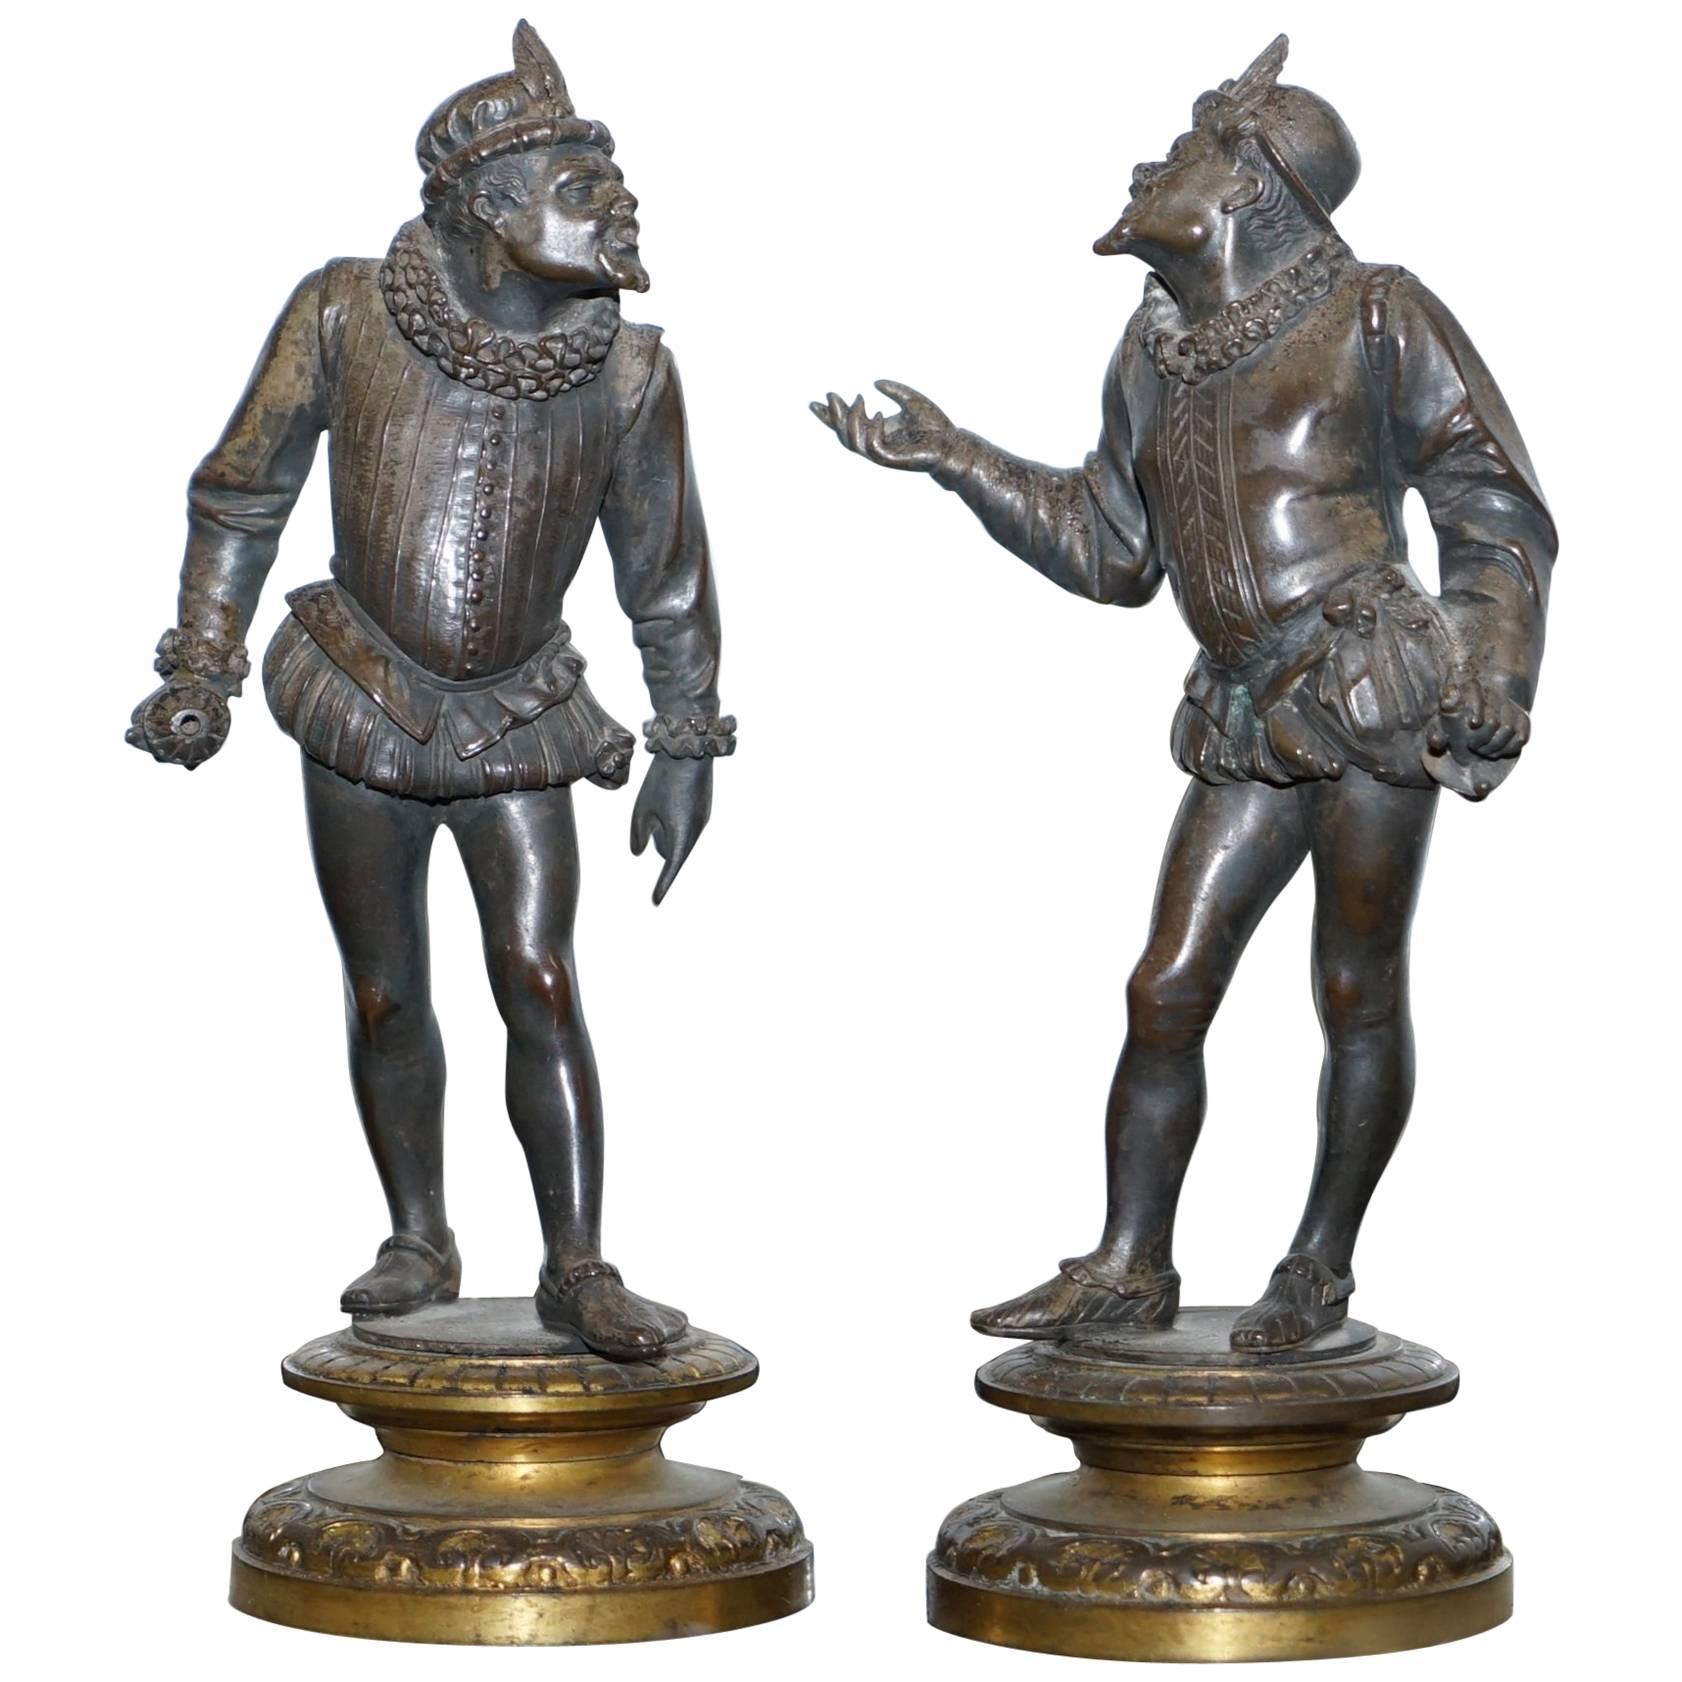 Pair of Antique Bronze Statues of Chaps Getting Ready to Duel Gloves Thrown Down